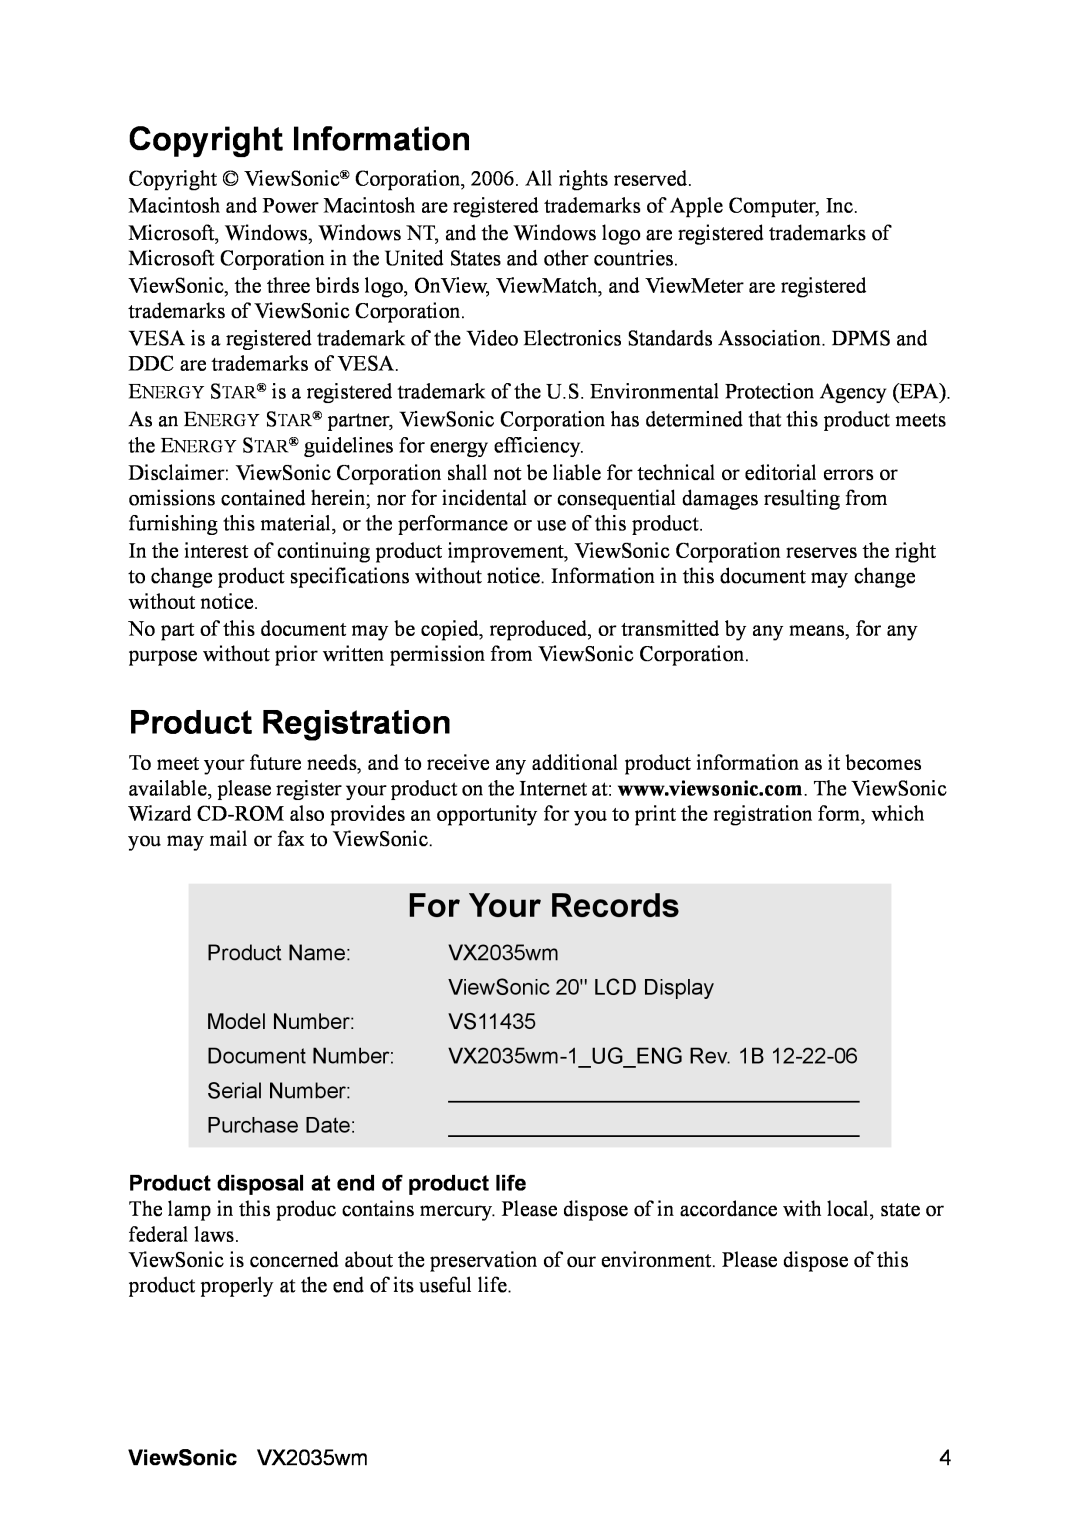 ViewSonic VX2035wm Copyright Information, Product Registration, For Your Records, Product disposal at end of product life 